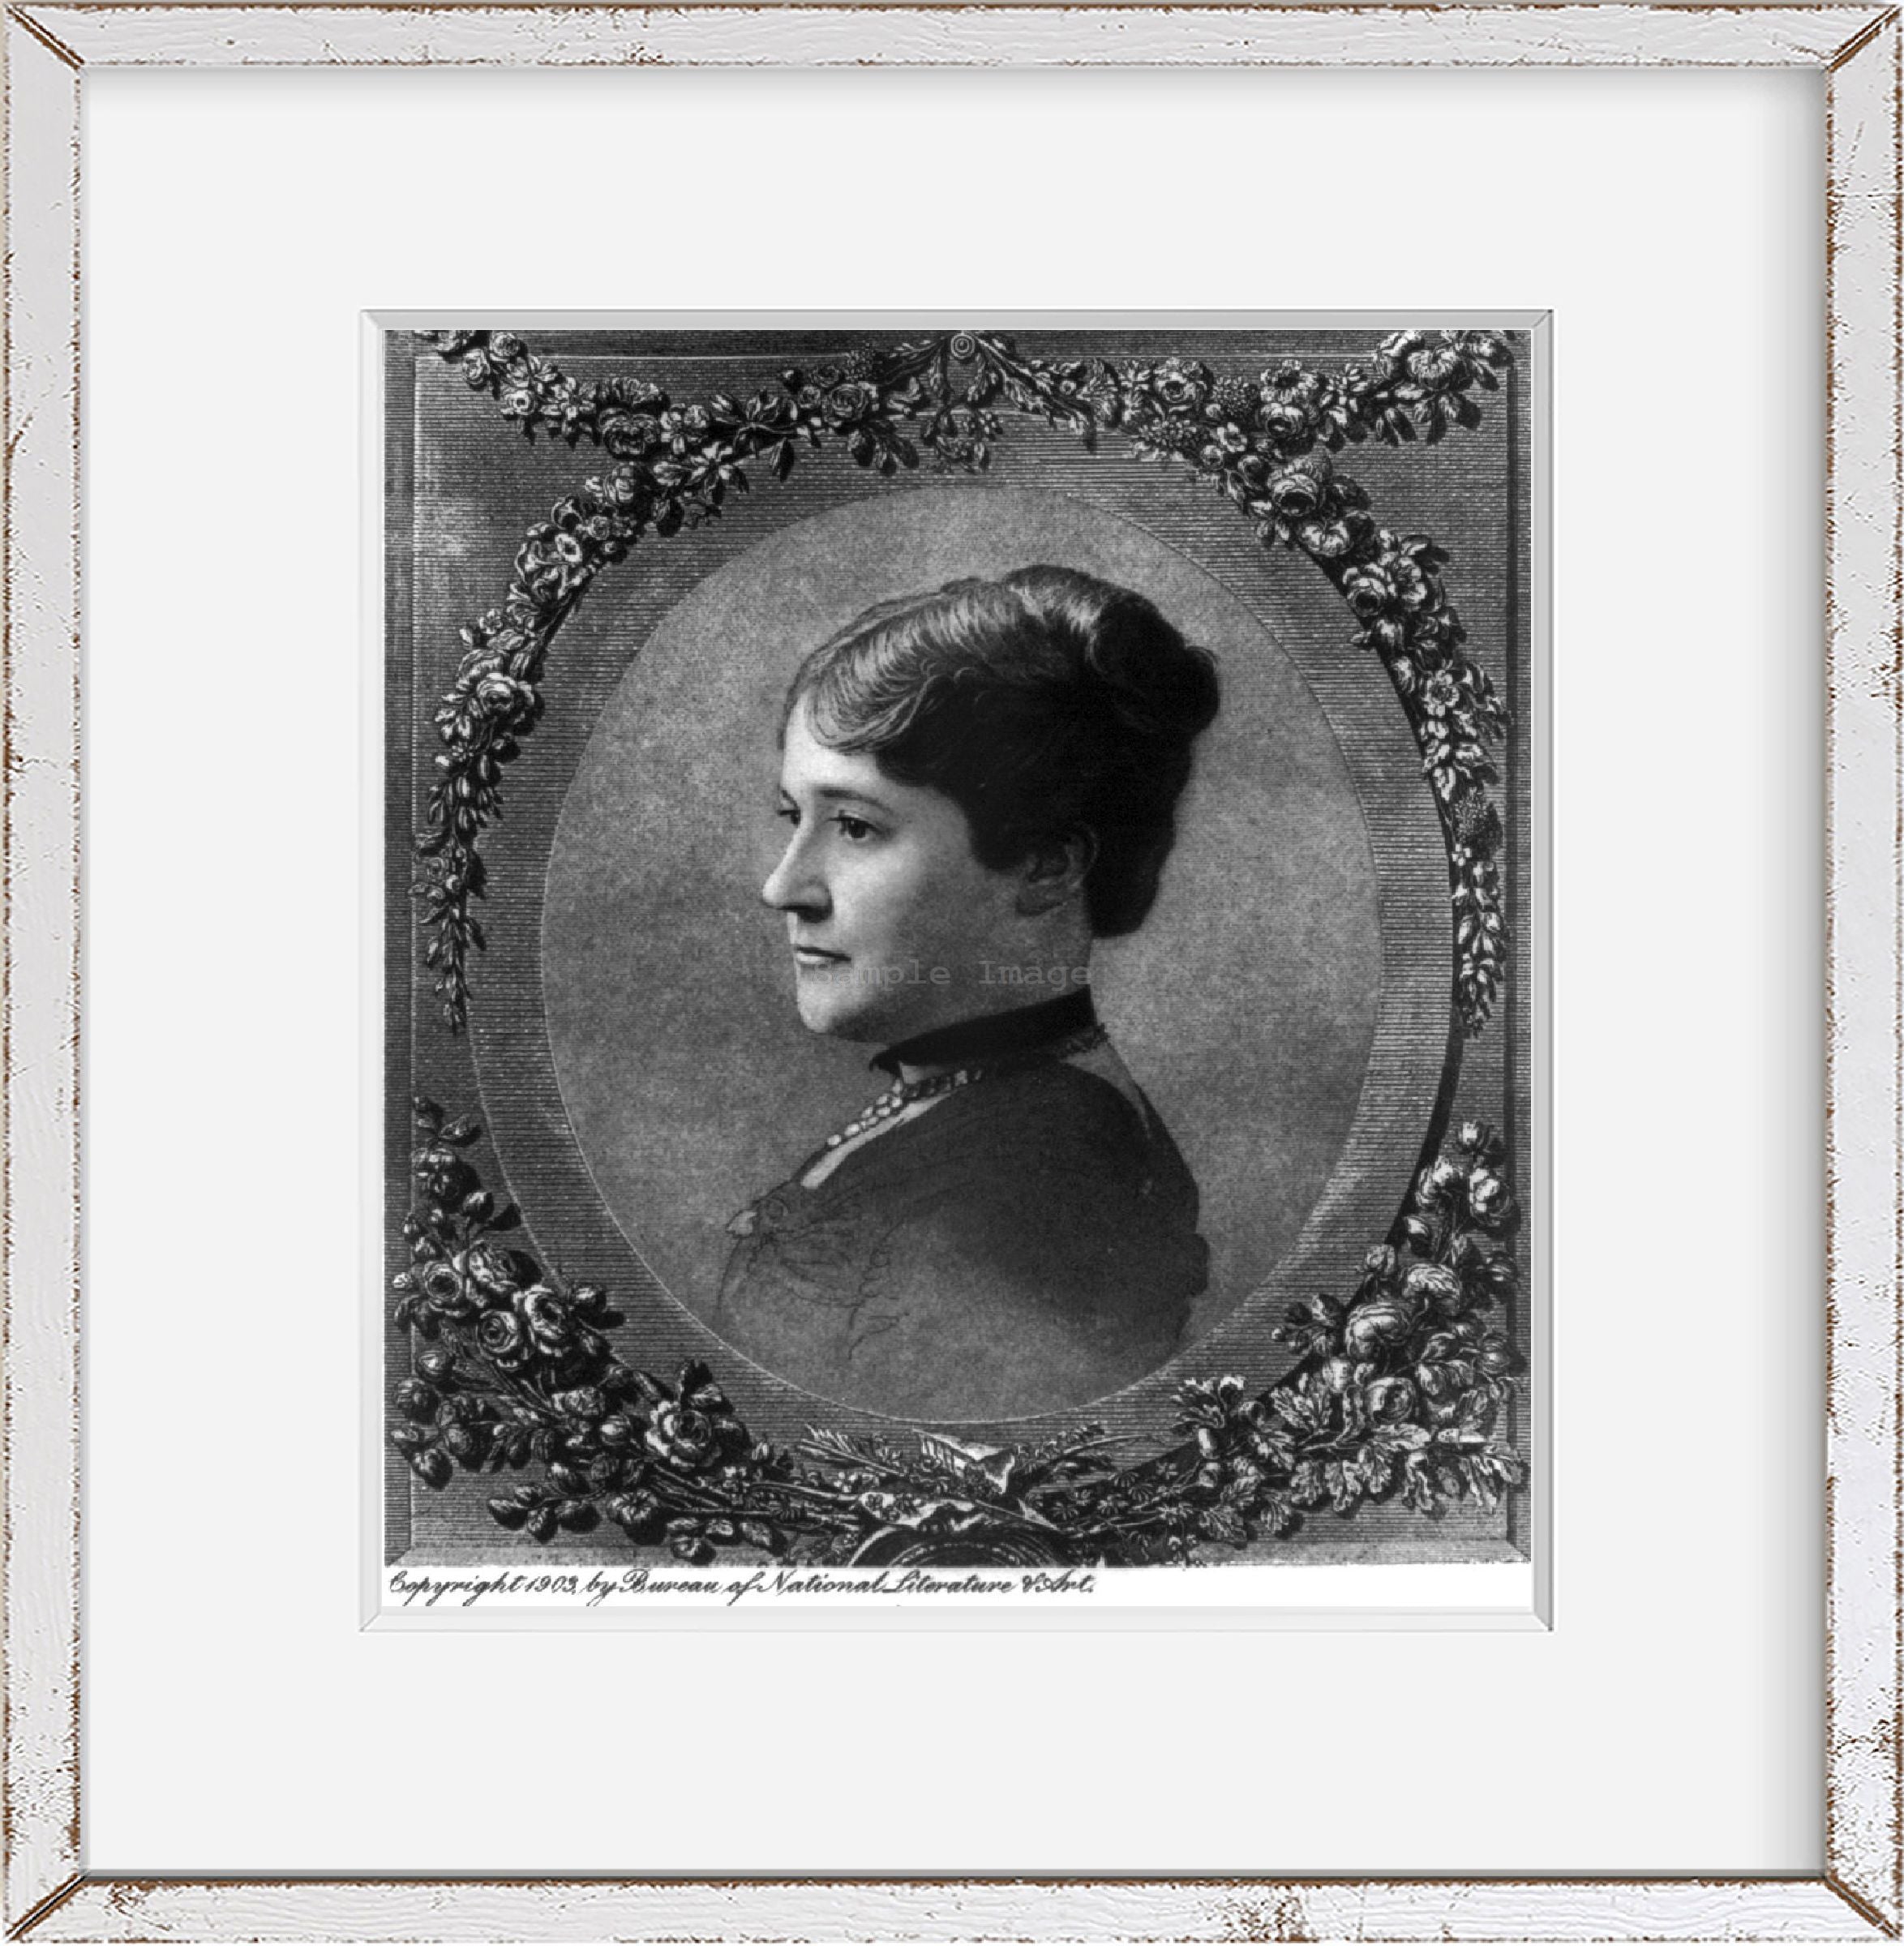 Photo: Mary Arthur McElroy, 1841-1917, sister of Chester A. Arthur, First Lady of U